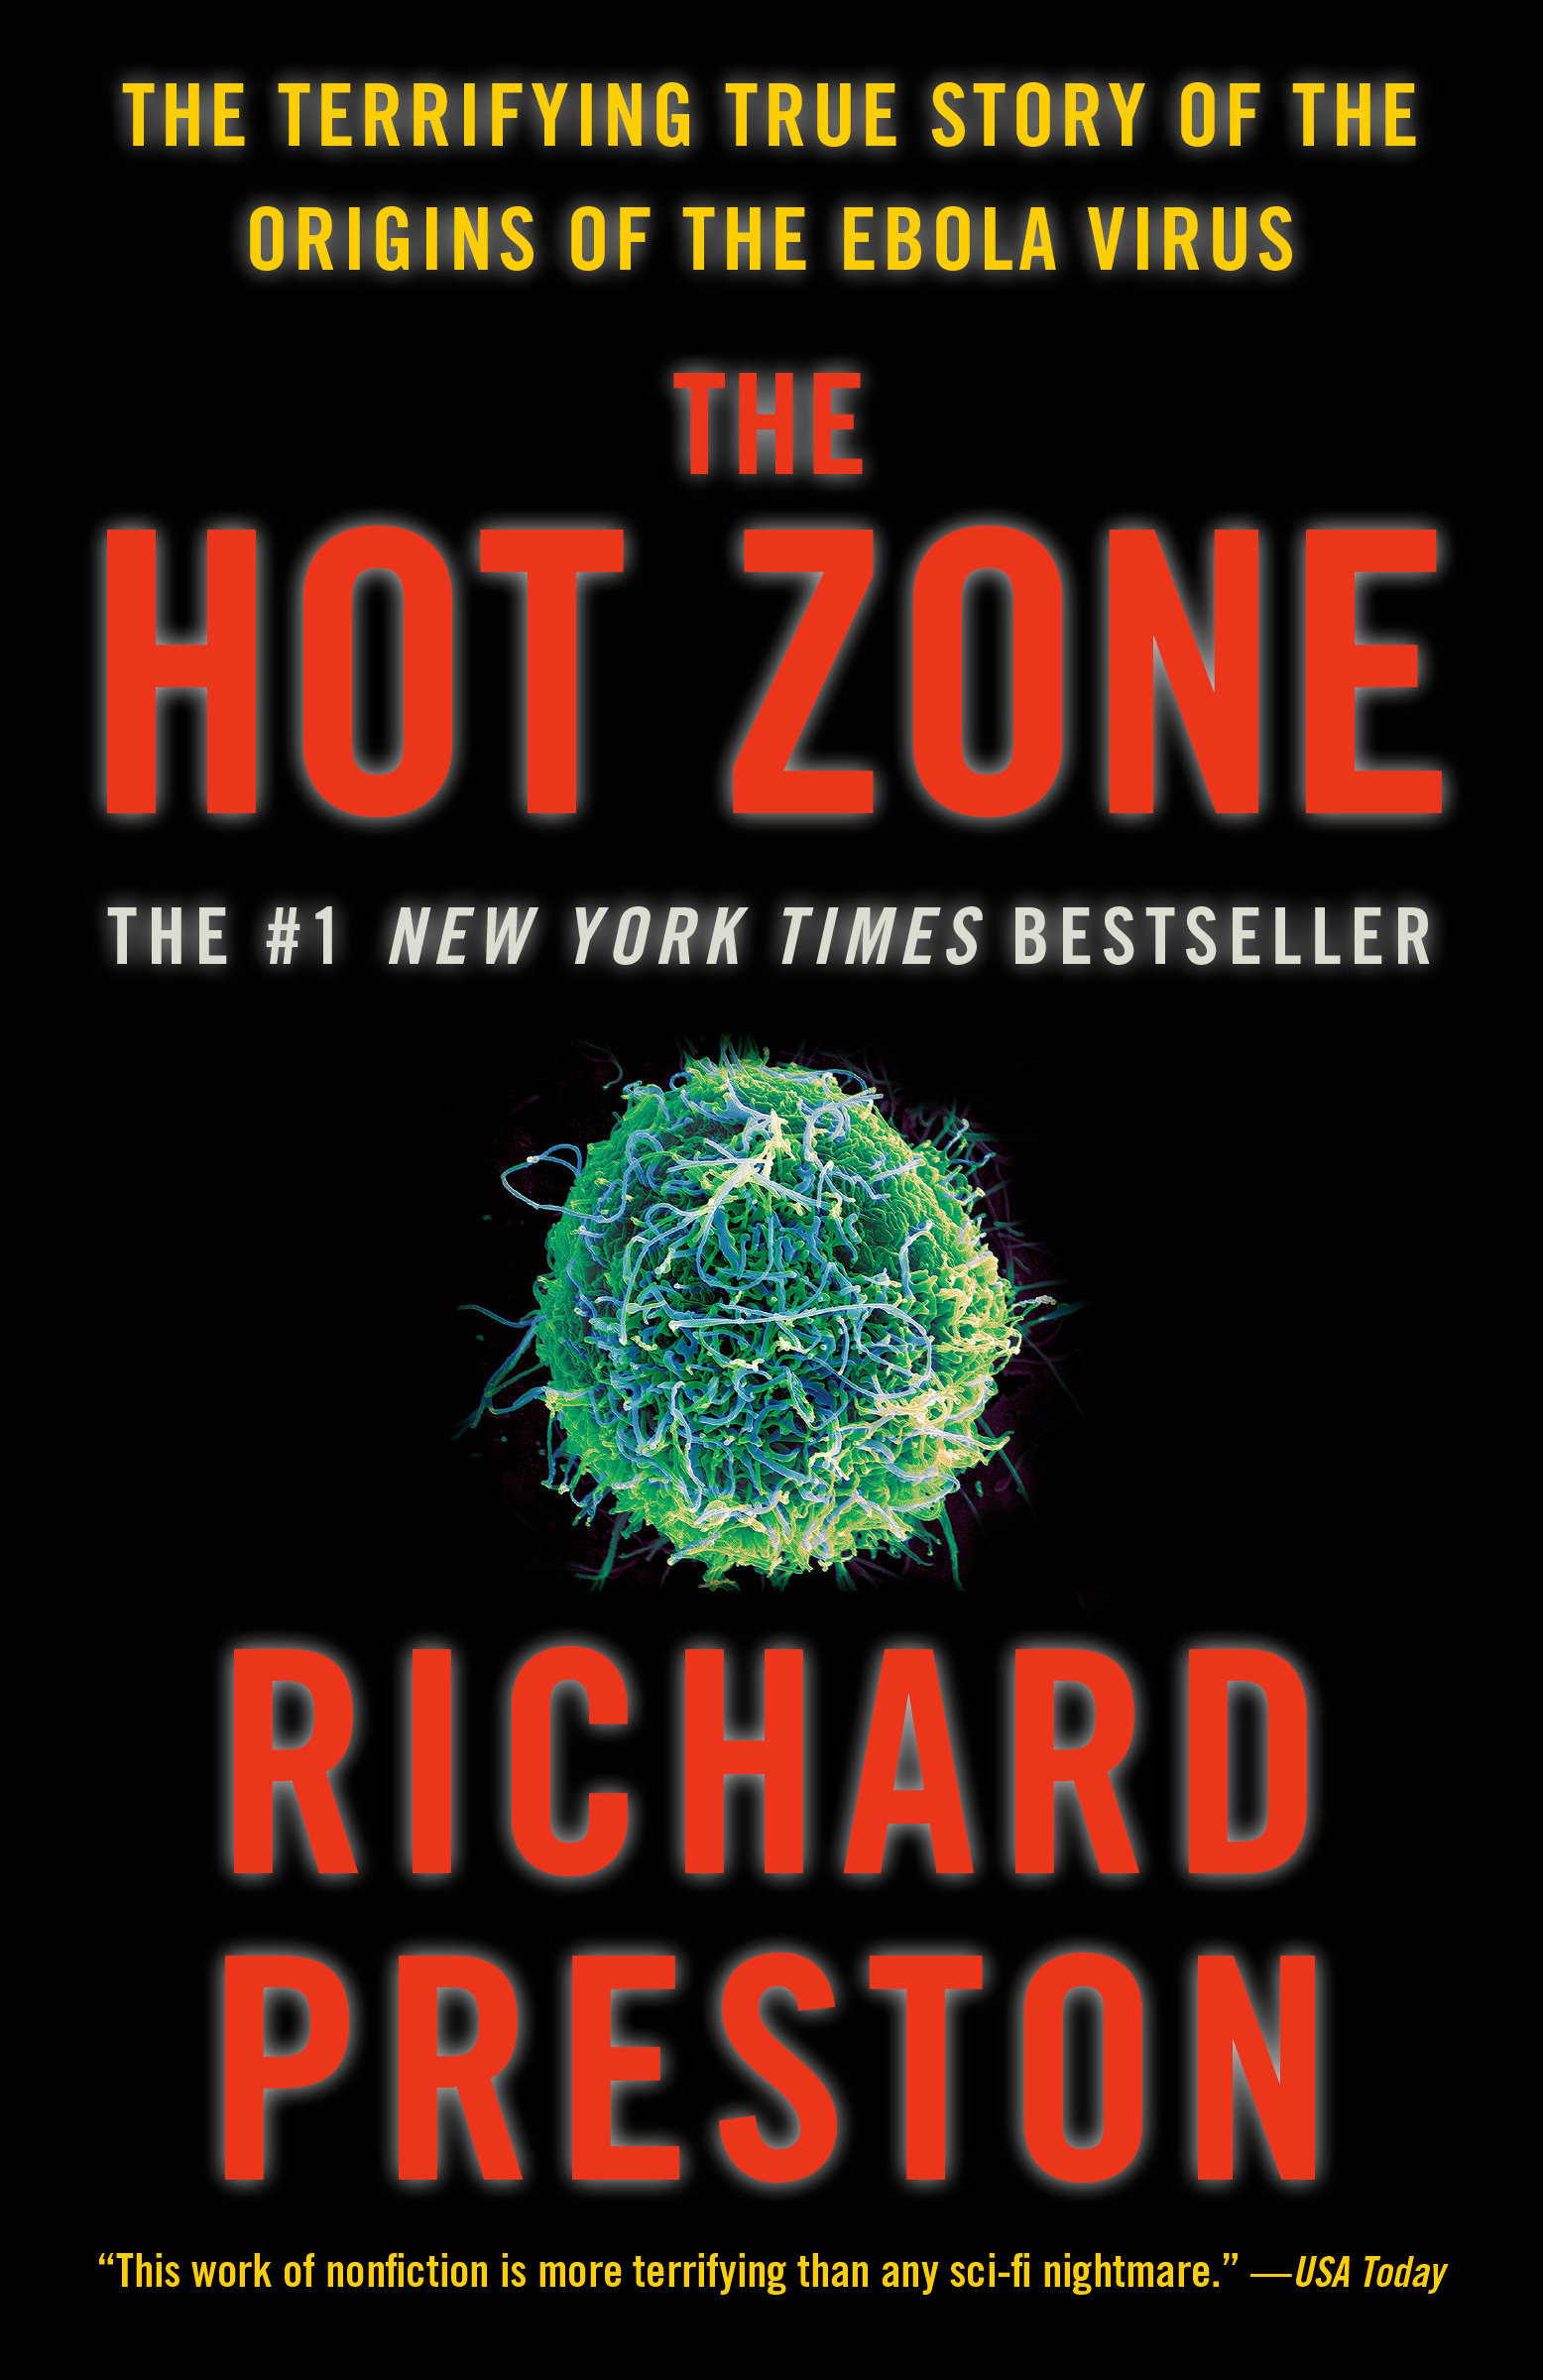 The hot zone the terrifying true story of the origins of the ebola virus cover image